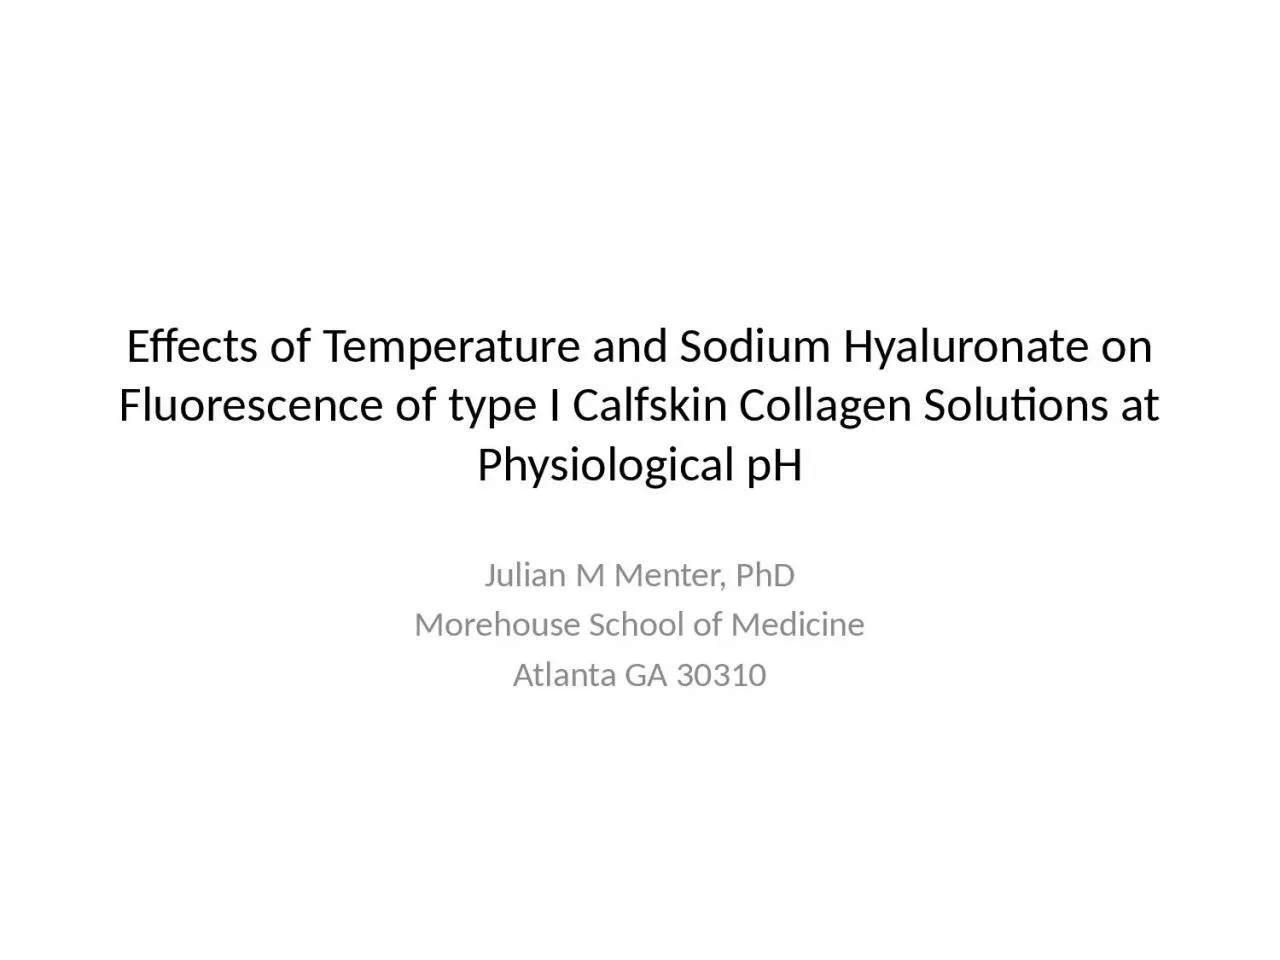 Effects of Temperature and Sodium